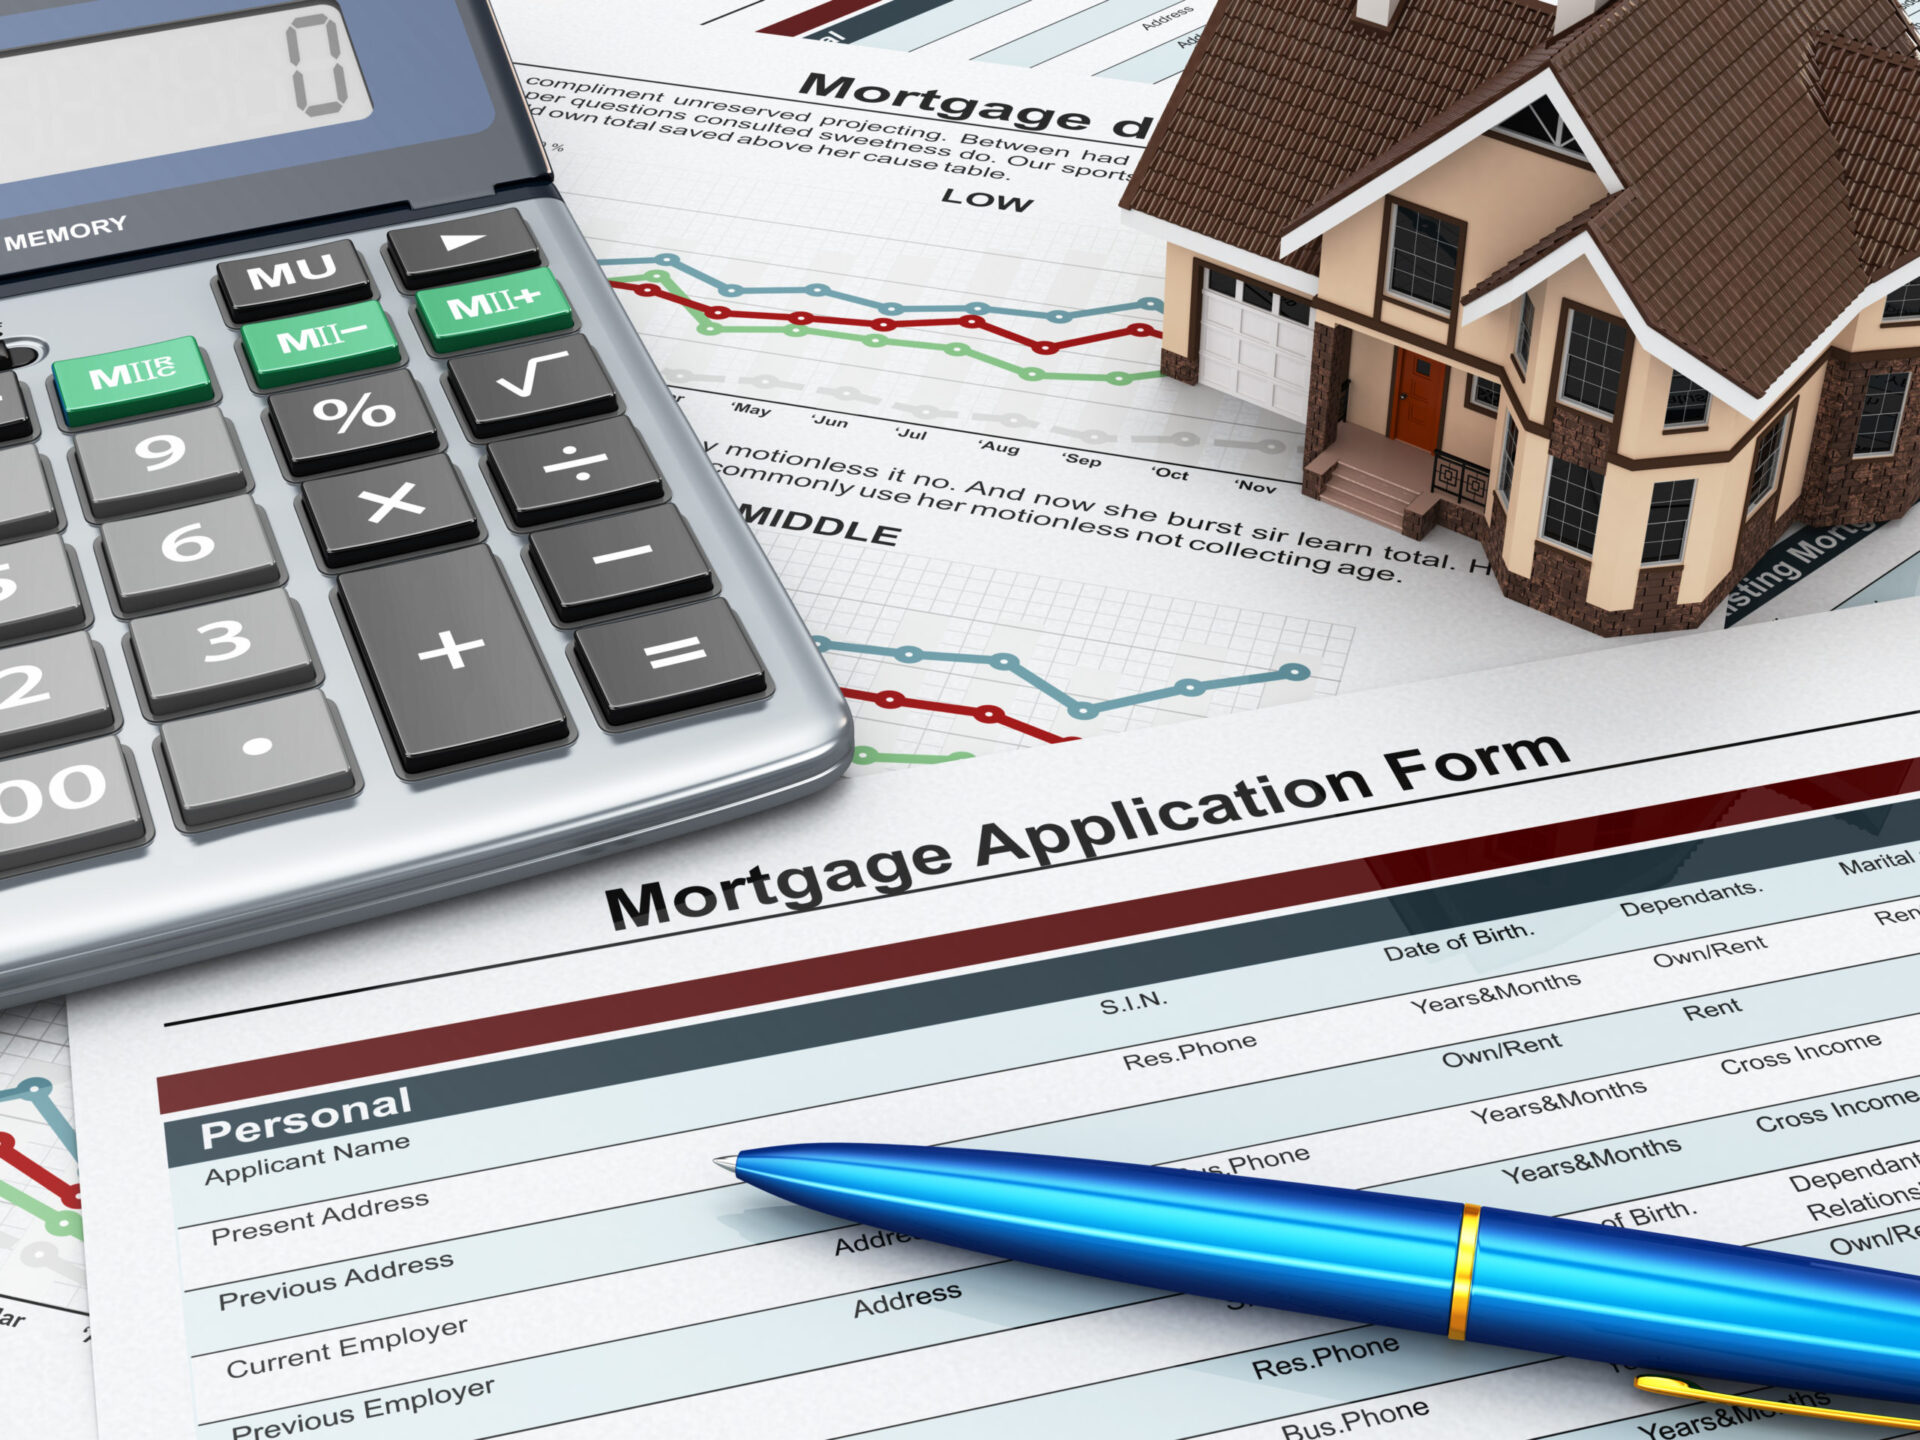 Adjustable-Rate Mortgages Poised To Make A Comeback?